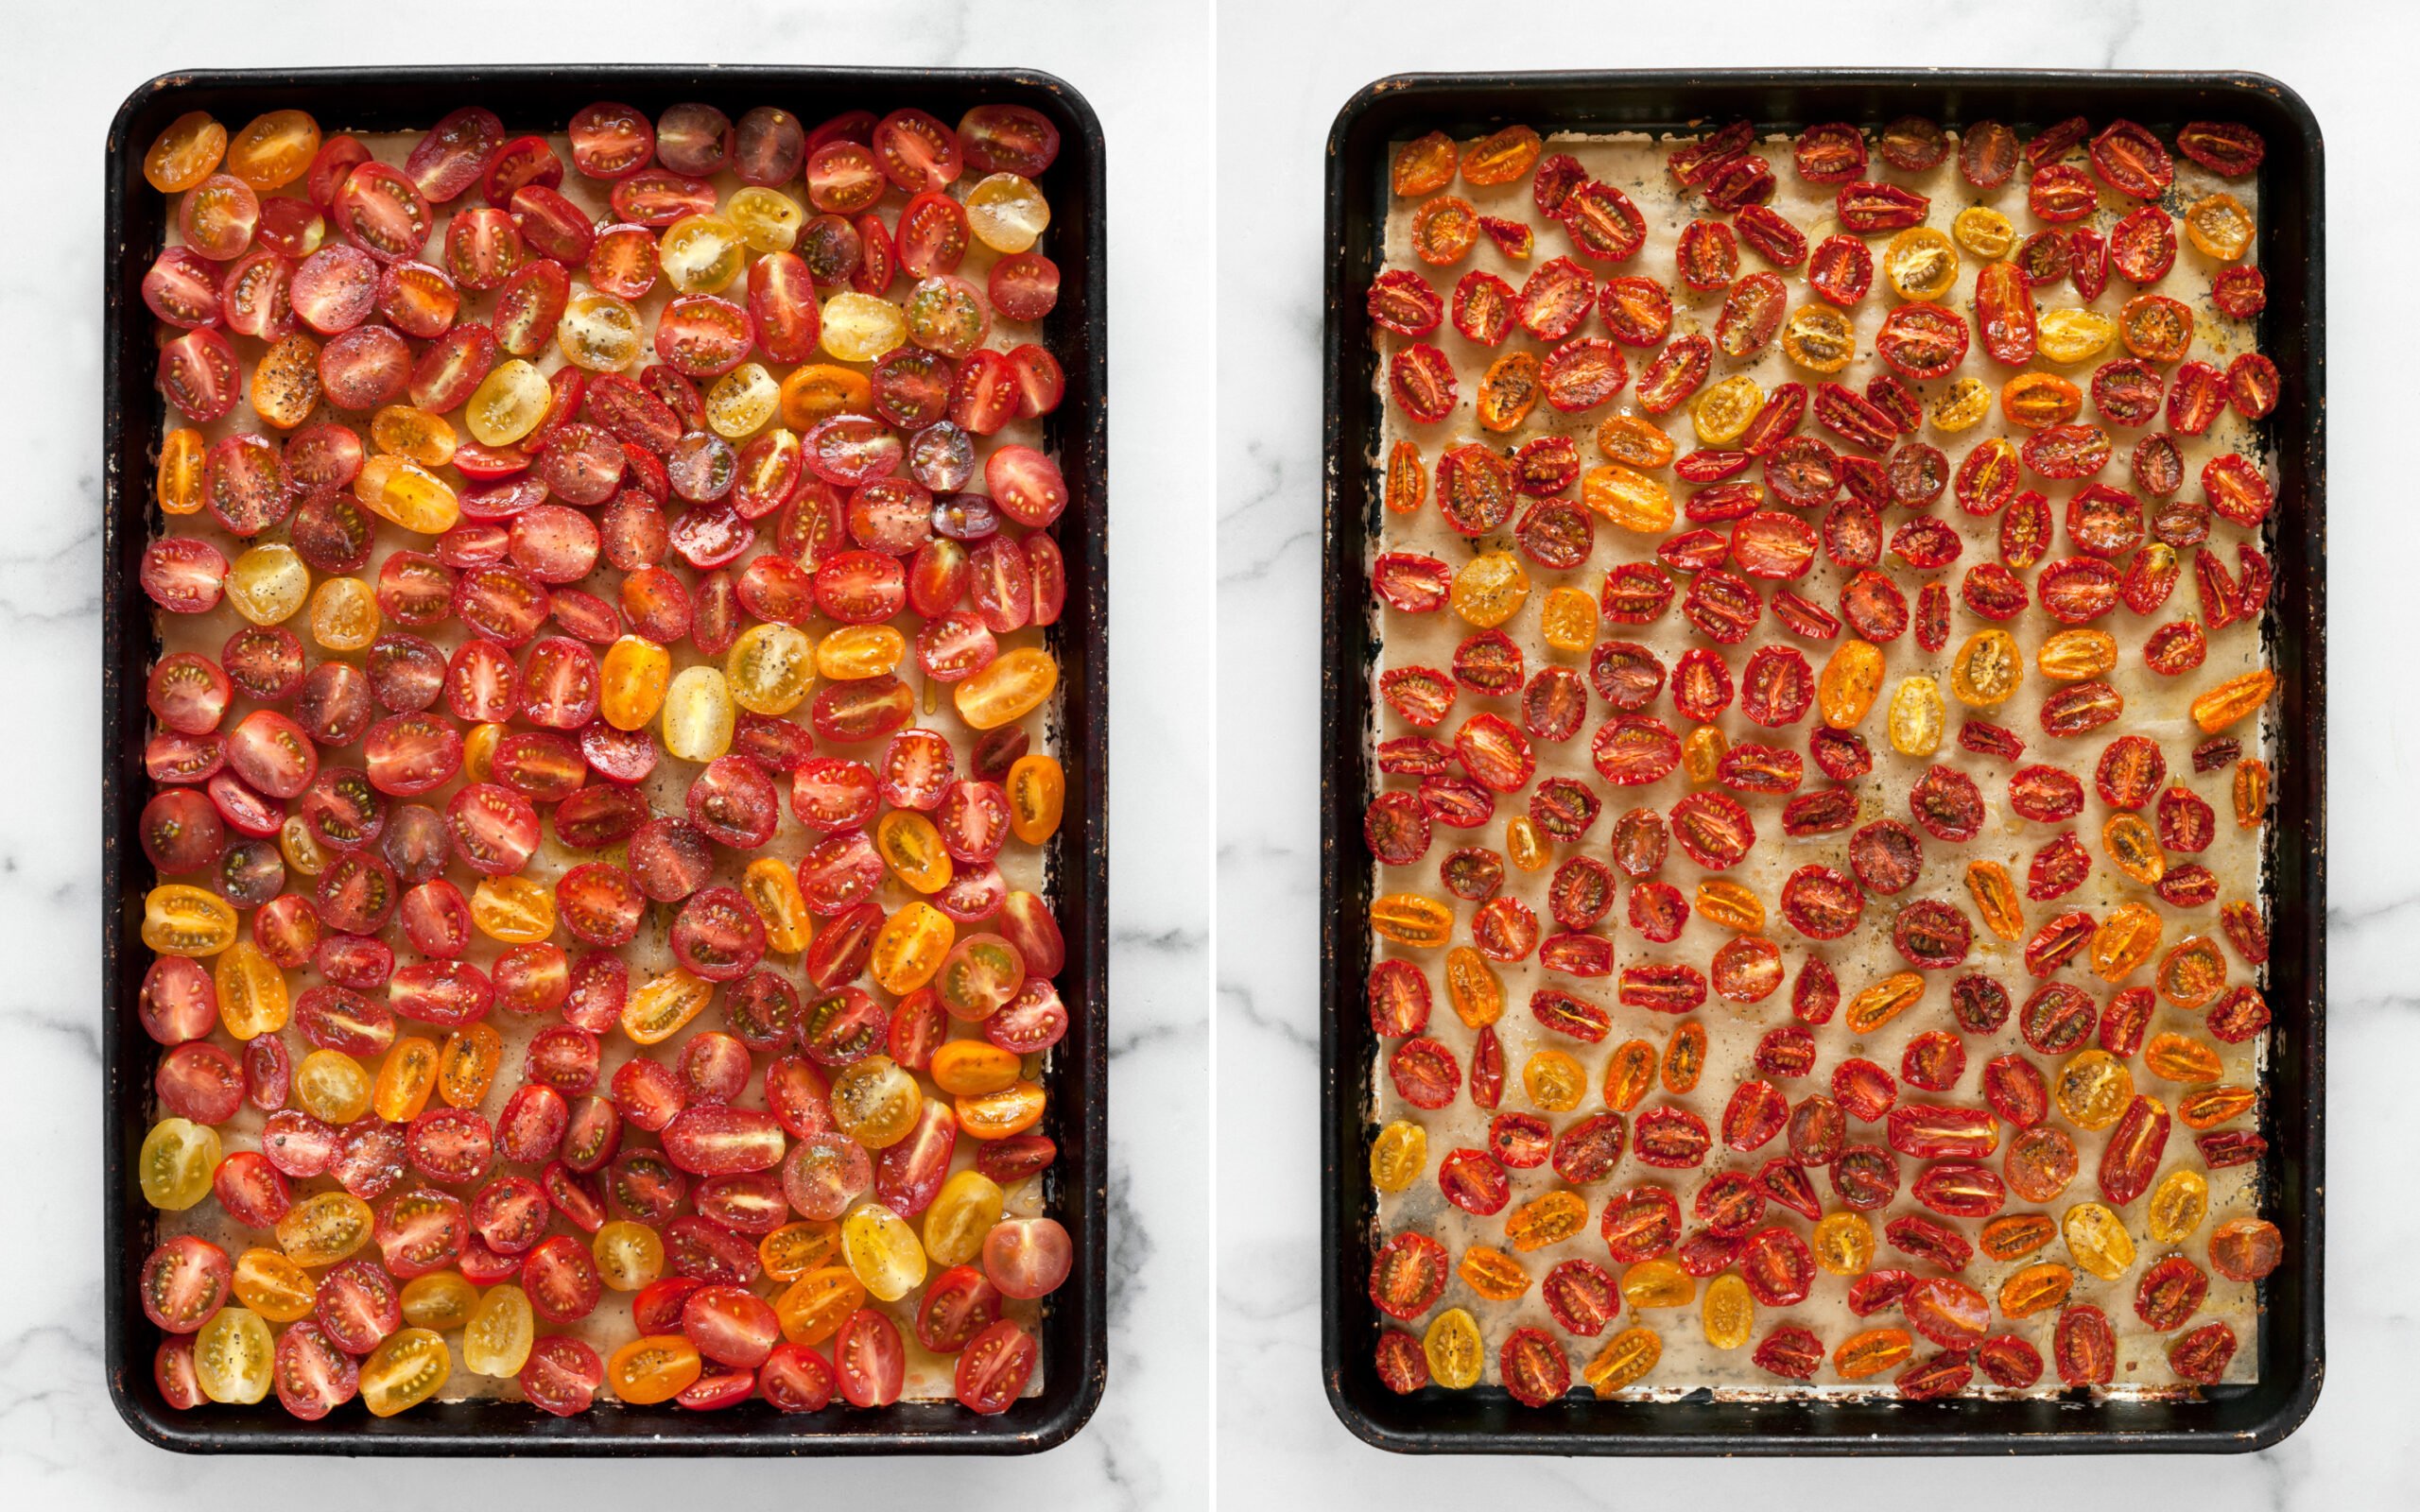 Tomatoes on a baking pan before and after they are roasted